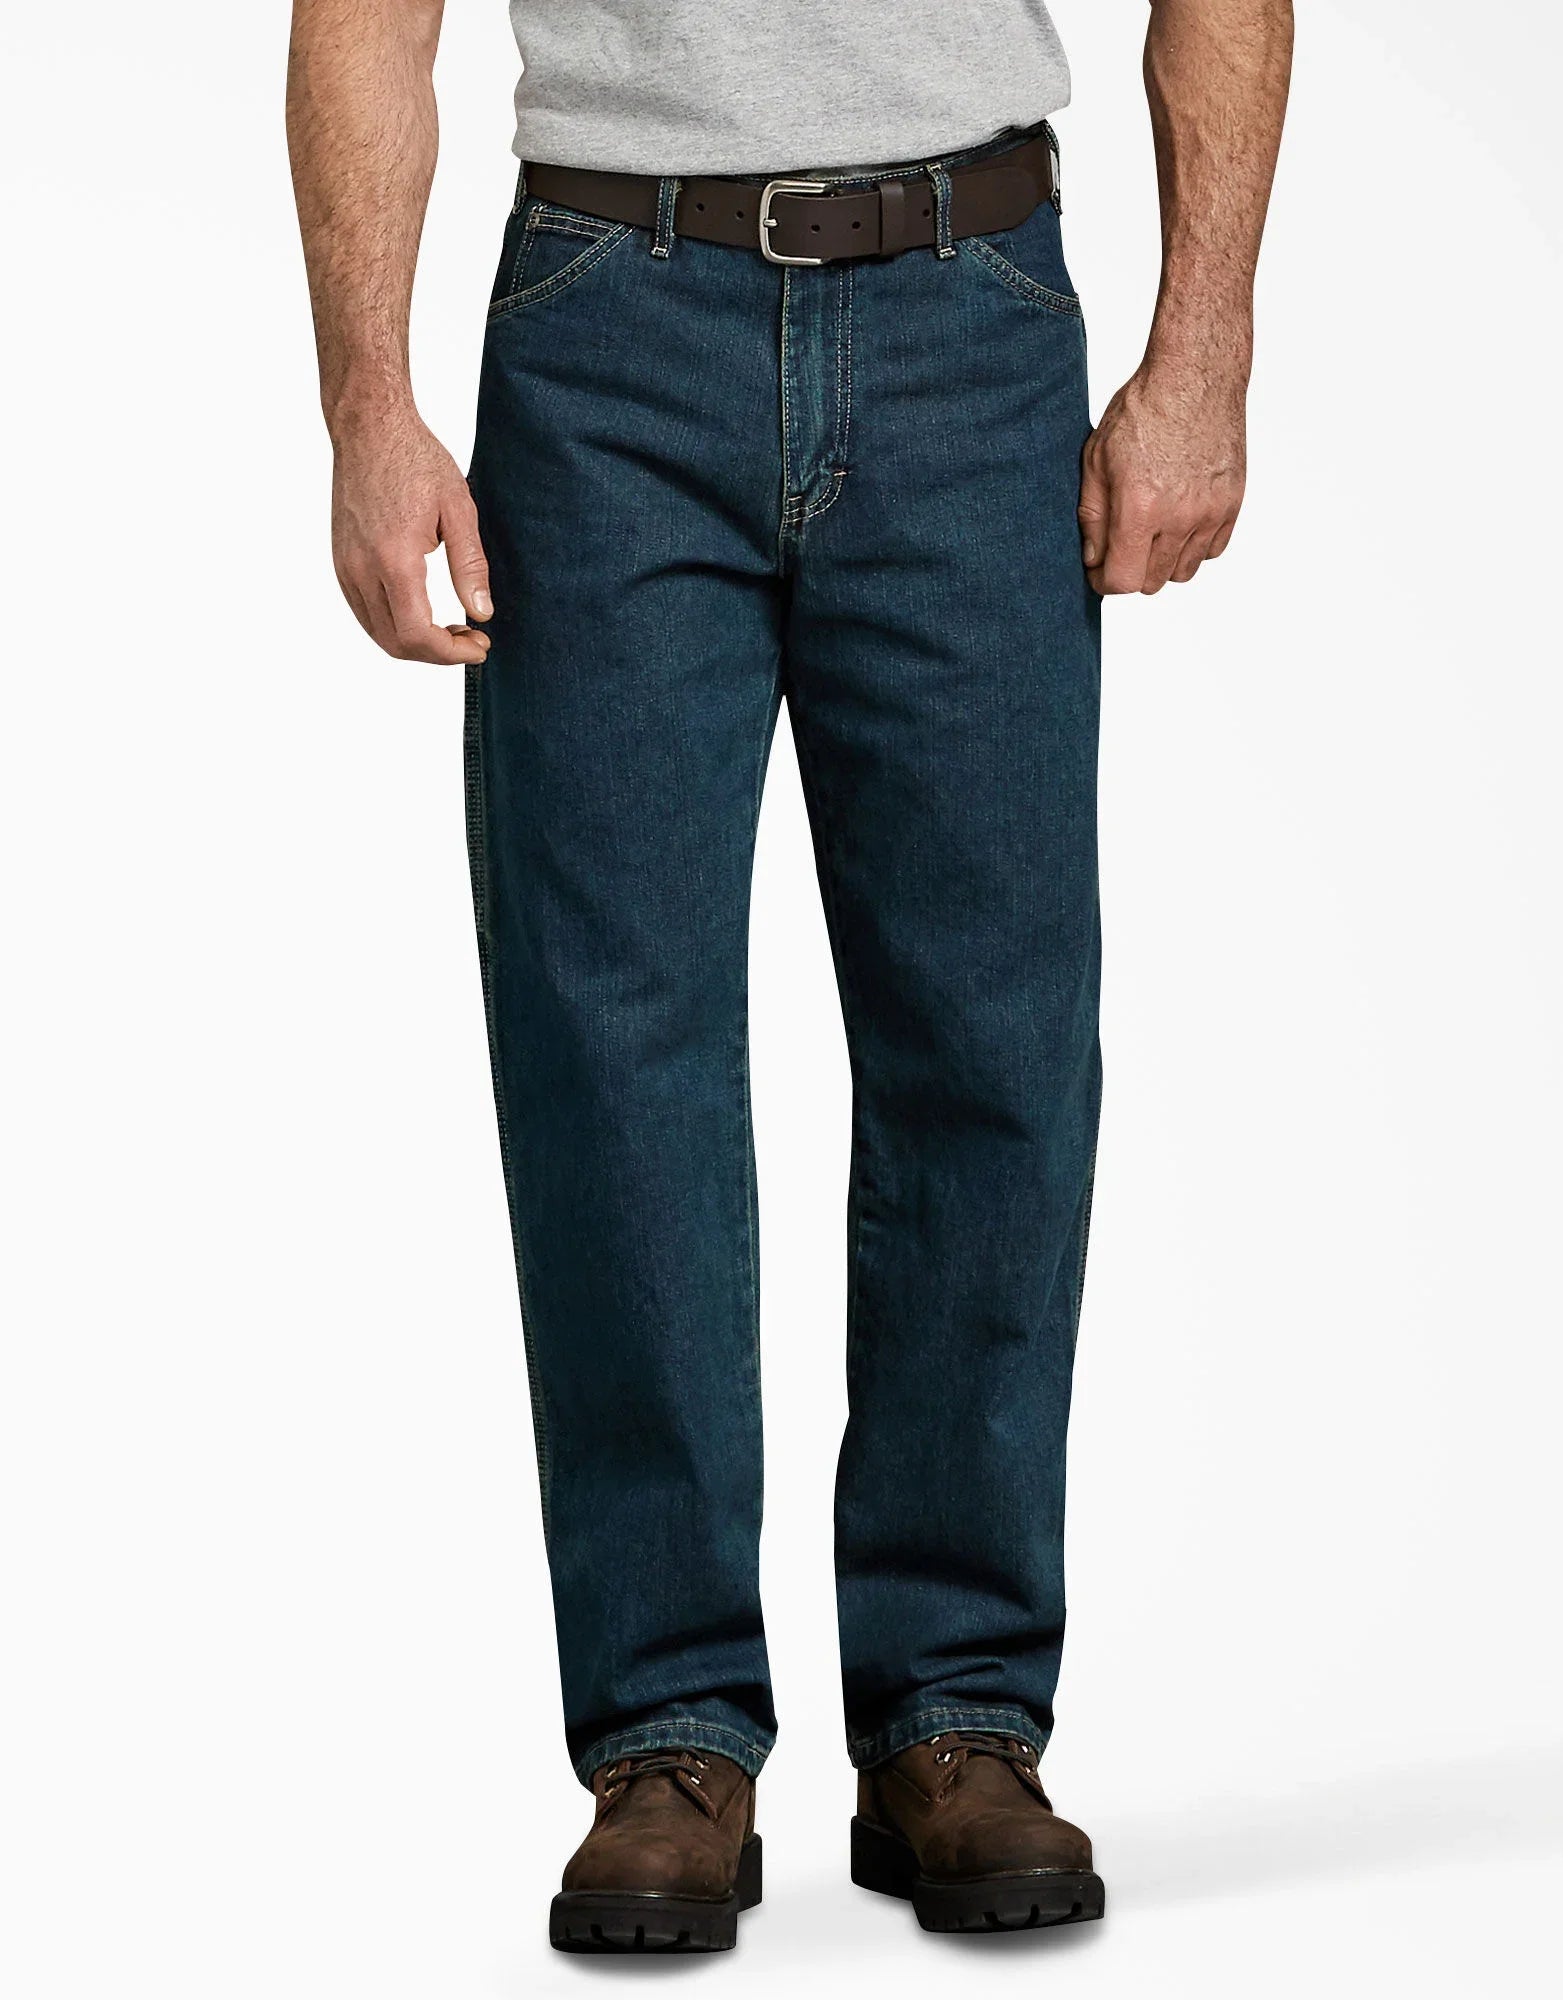 Dickies Men's Relaxed Fit Carpenter Denim Jean_Tinted Heritage Khaki - Work World - Workwear, Work Boots, Safety Gear